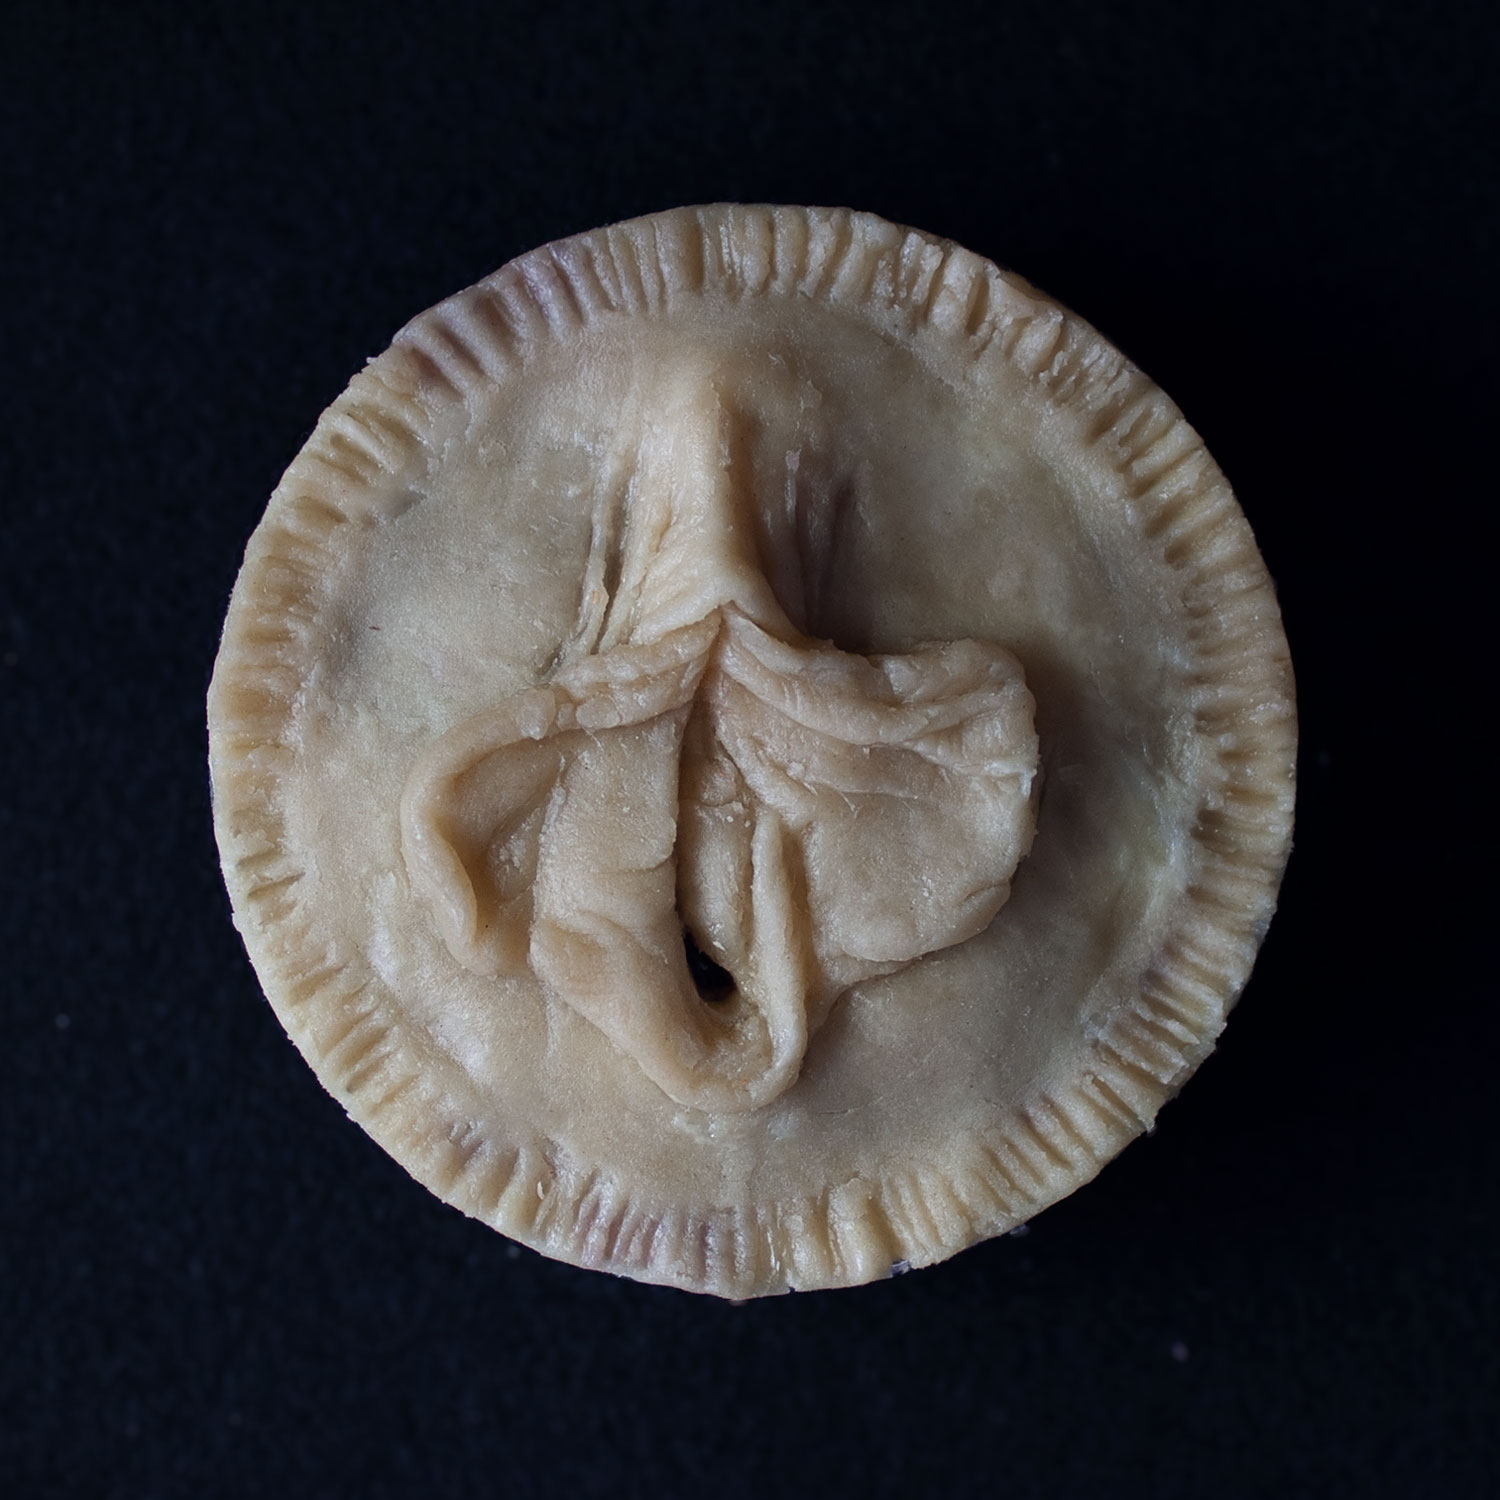 Pie 11, a pie sculpted to appear like a vulva